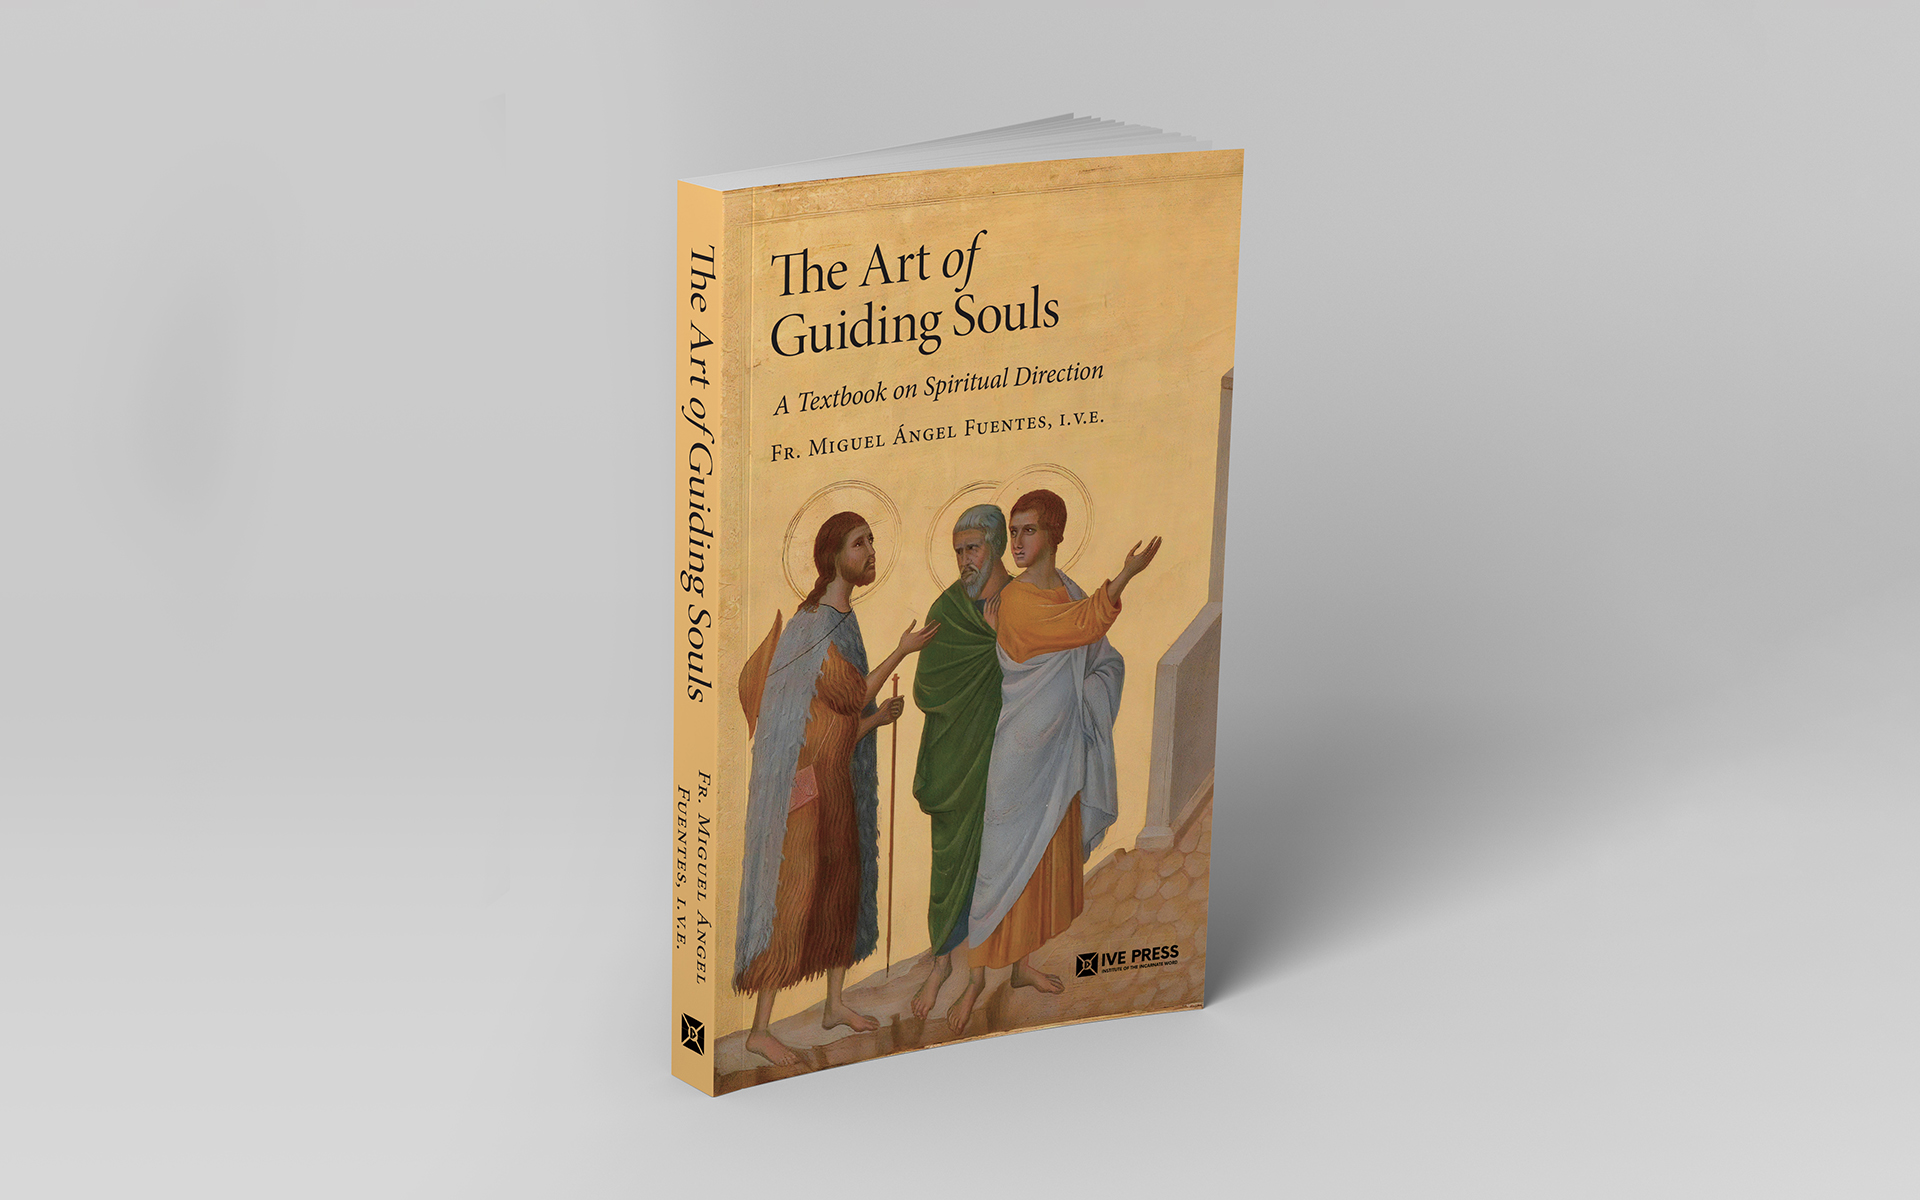 The Art of Guiding Souls. Book cover. Design by Pablo Mandel.